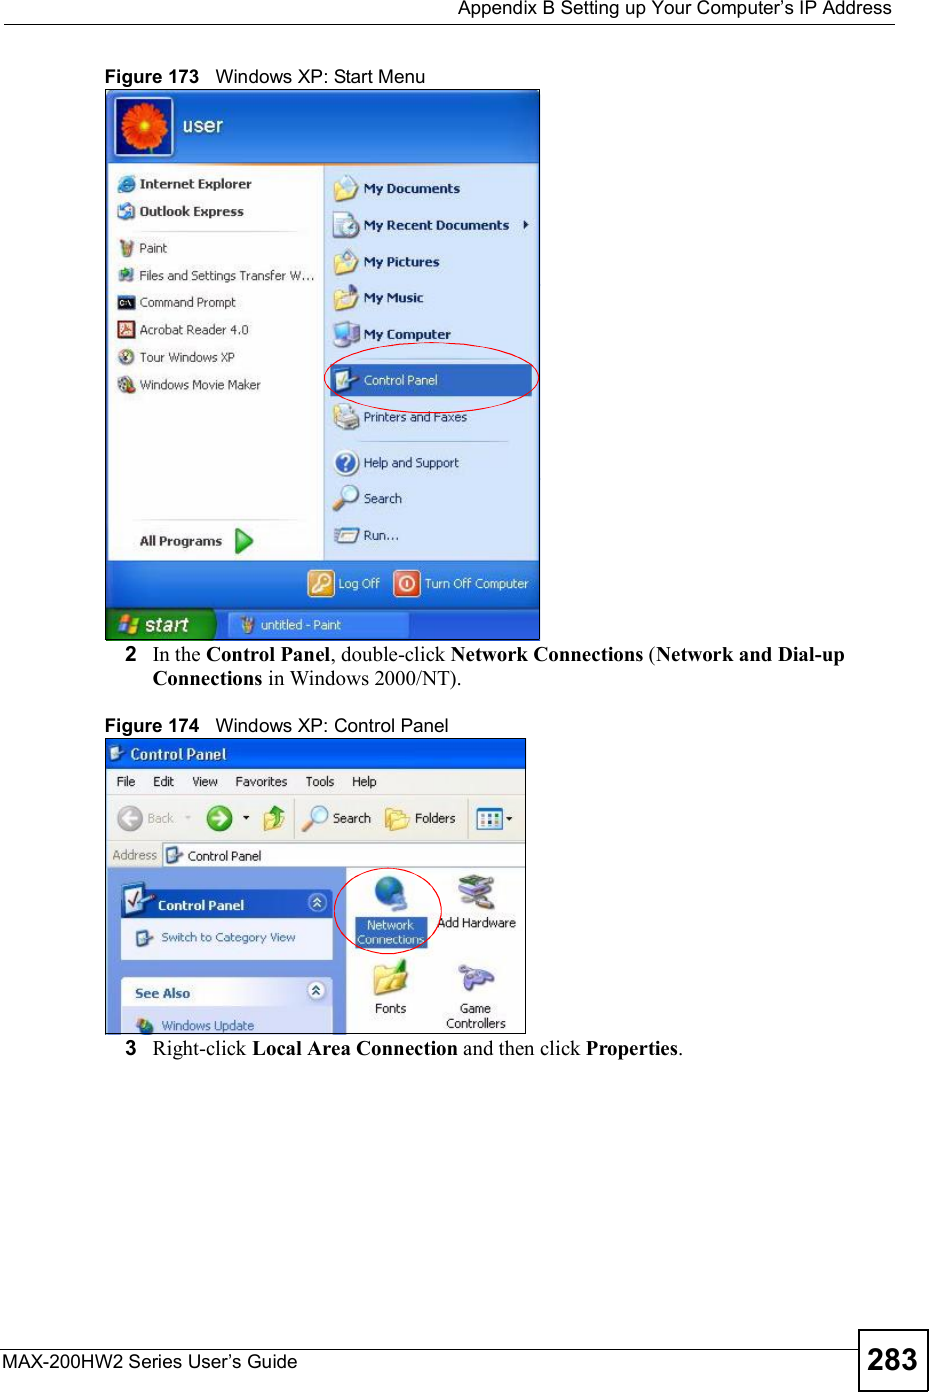  Appendix BSetting up Your Computer s IP AddressMAX-200HW2 Series User s Guide 283Figure 173   Windows XP: Start Menu2In the Control Panel, double-click Network Connections (Network and Dial-up Connections in Windows 2000/NT).Figure 174   Windows XP: Control Panel3Right-click Local Area Connection and then click Properties.